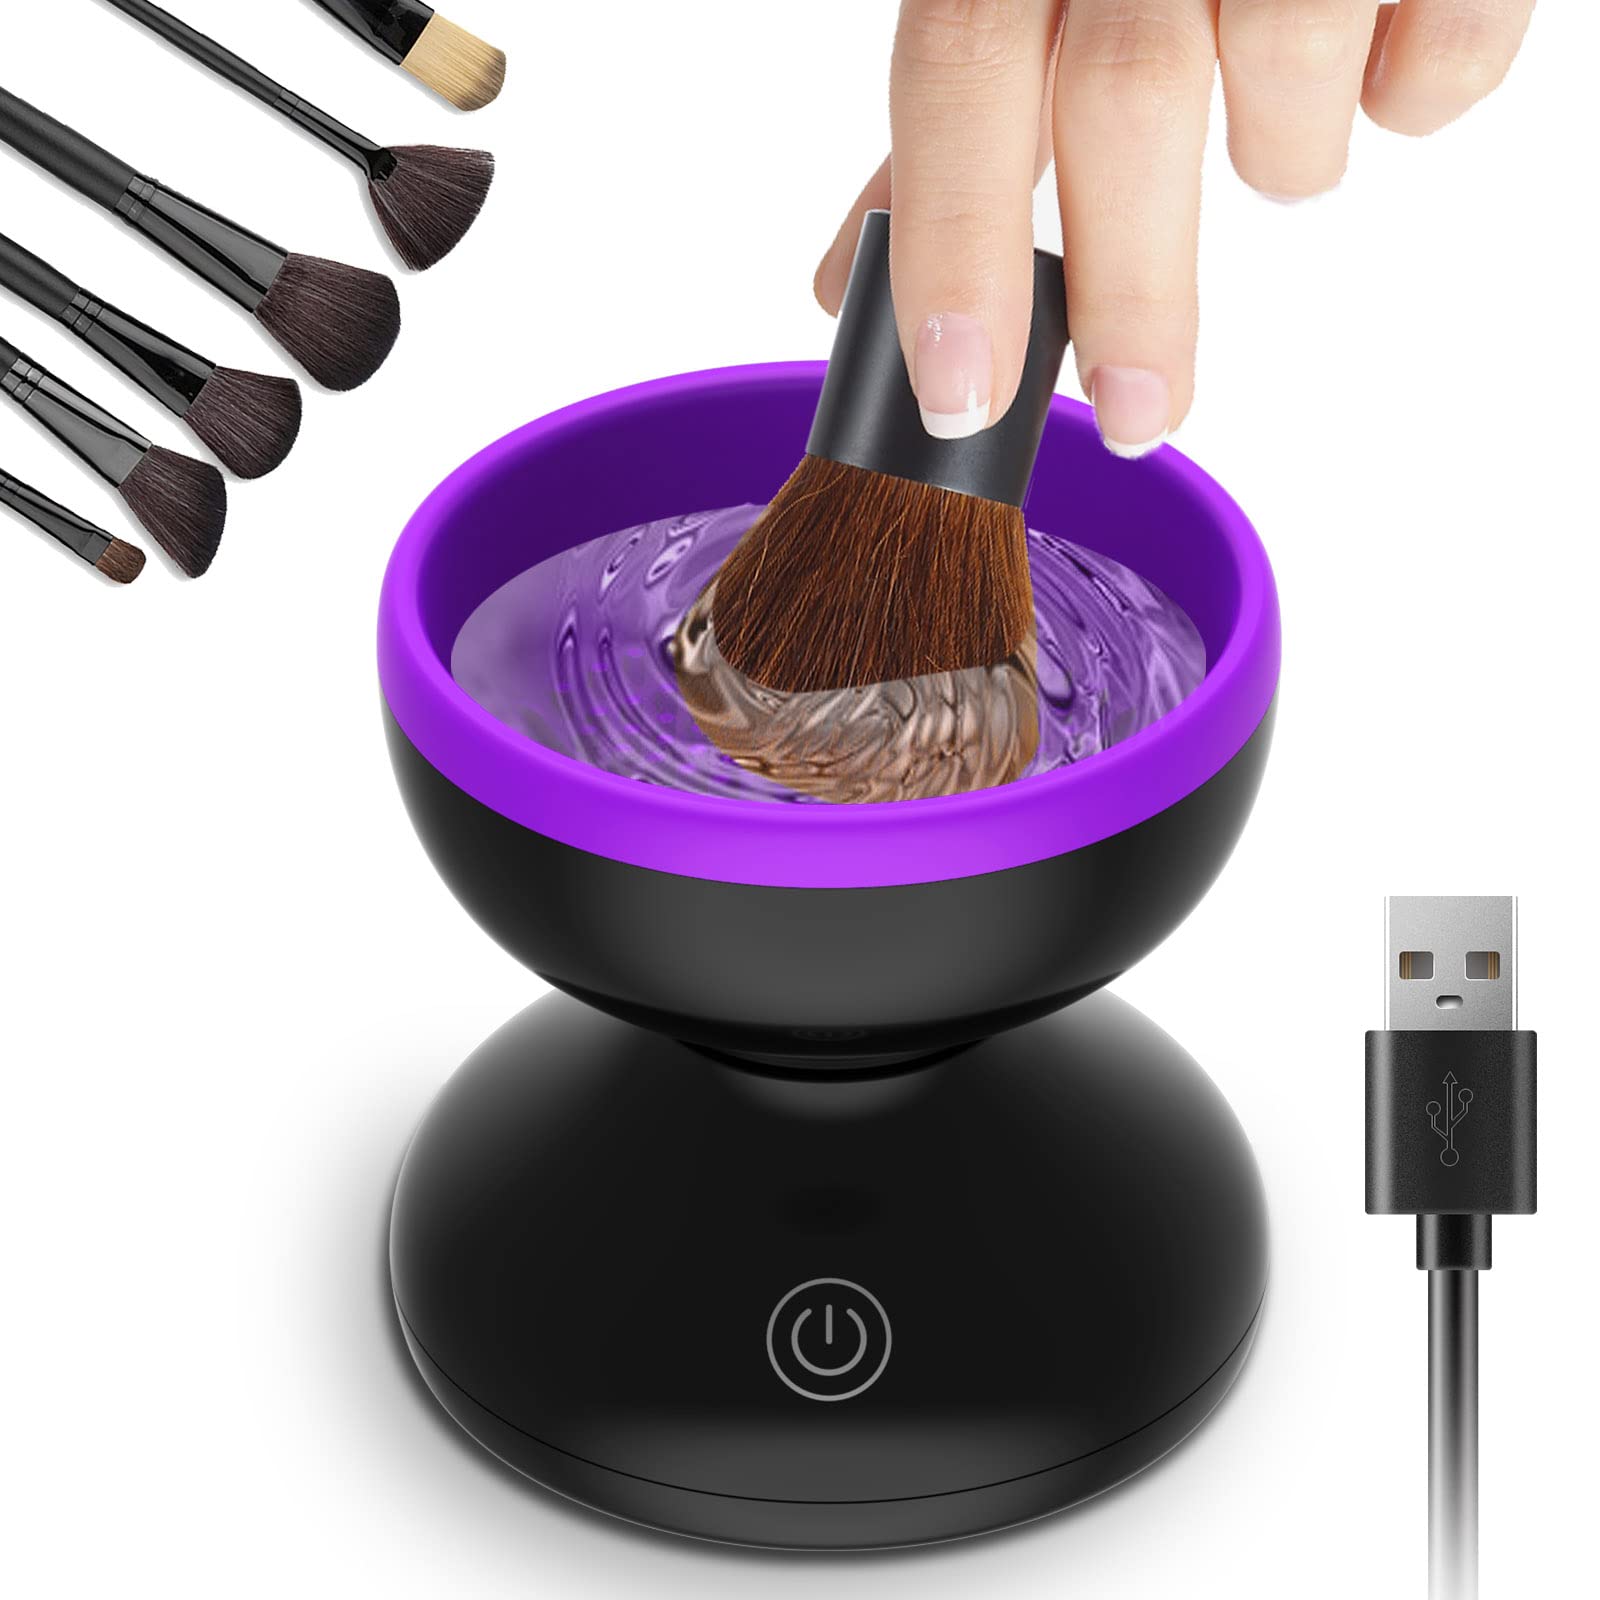  Electric Makeup Brush Cleaner, Makeup Brush Cleaner Machine  with Brush Clean Mat, Automatic Cosmetic Brush Cleaner Makeup Brush Tools  for All Size Beauty Makeup Brushes Set, Gift for Women Wife Friend 